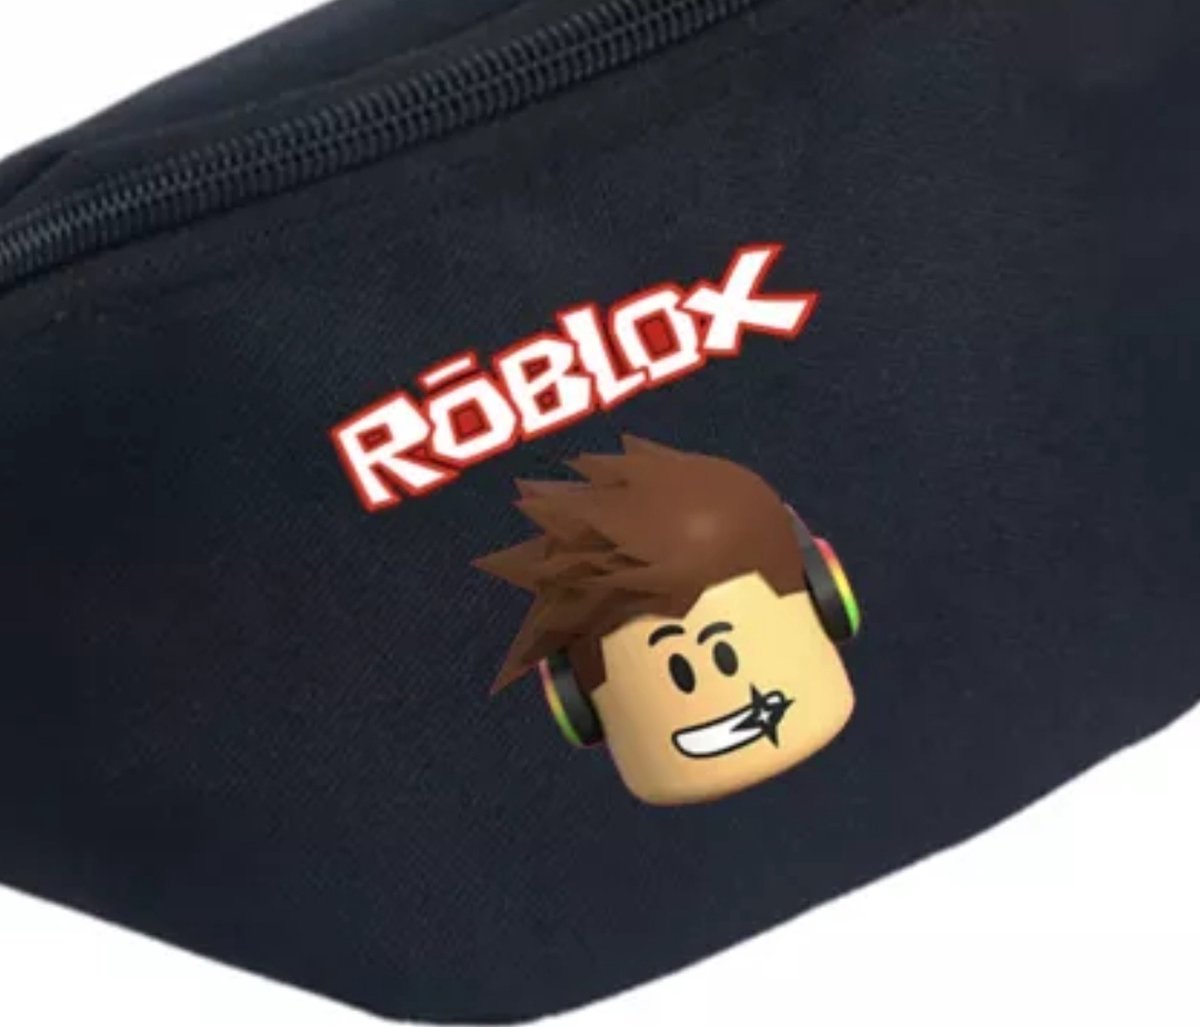 Roblox Fanny Pack Roblox Fanny Pack Cadeau Roblox Sac Roblos Fournitures 